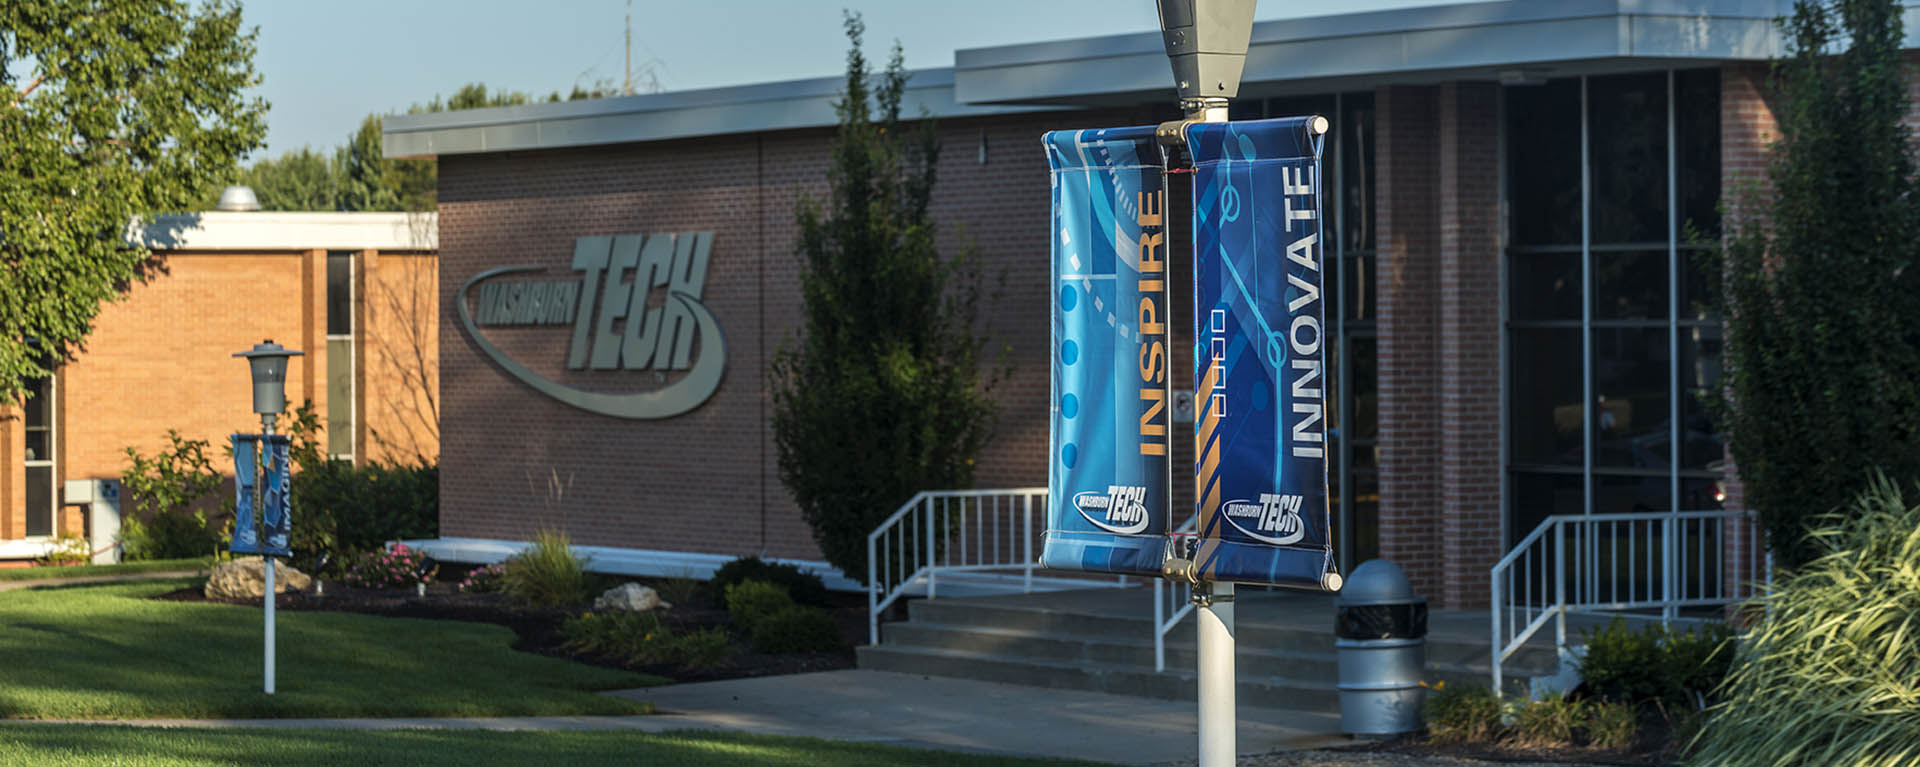 Two sign poles with Washburn Tech banners outside a building.